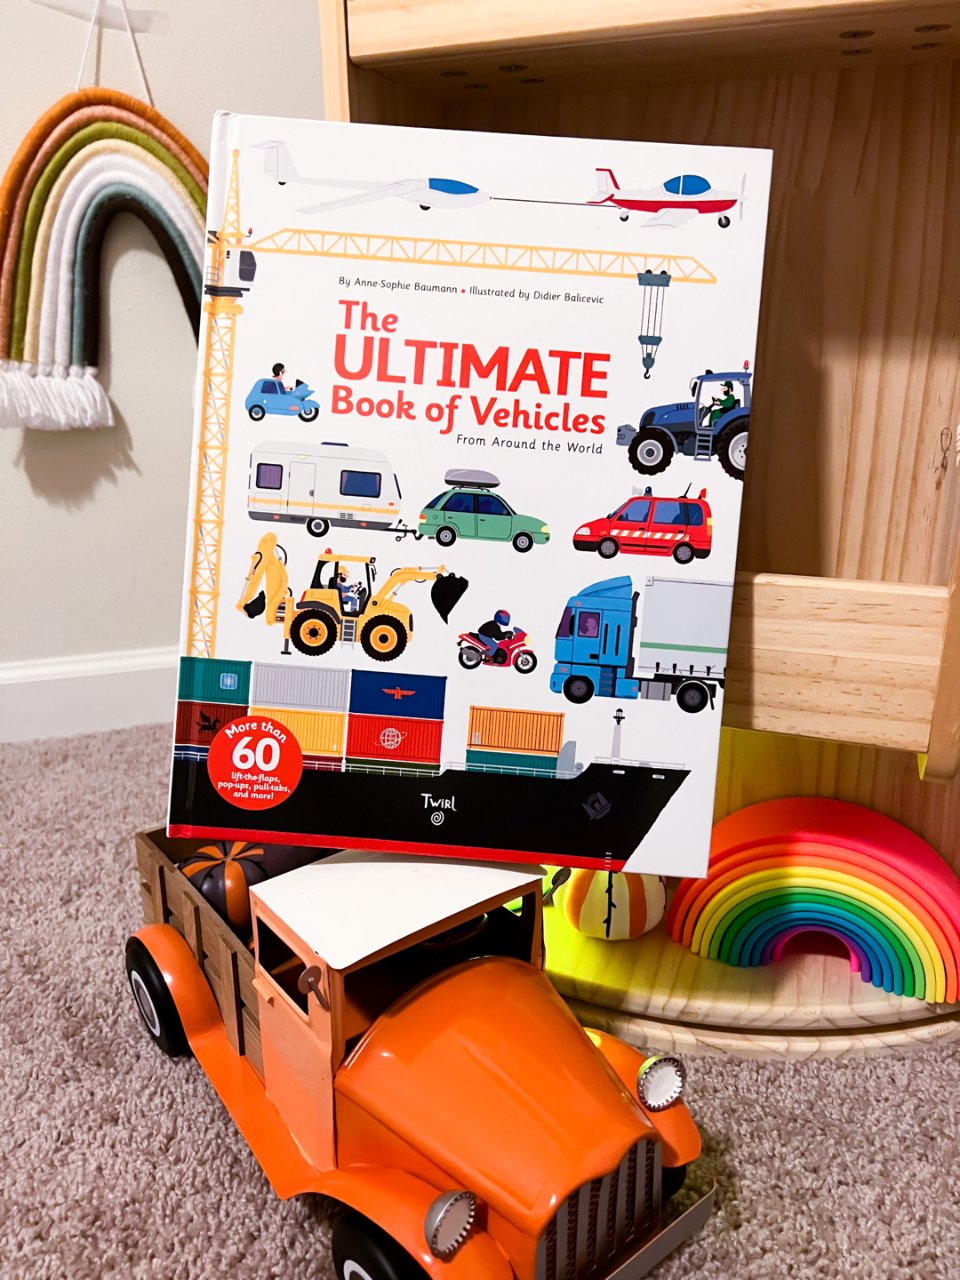 The Ultimate Book of Vehicles: From Around the World (Ultimate Book, 1): Baumann, Anne-Sophie, Balicevic, Didier: 9782848019420: Amazon.com: Books